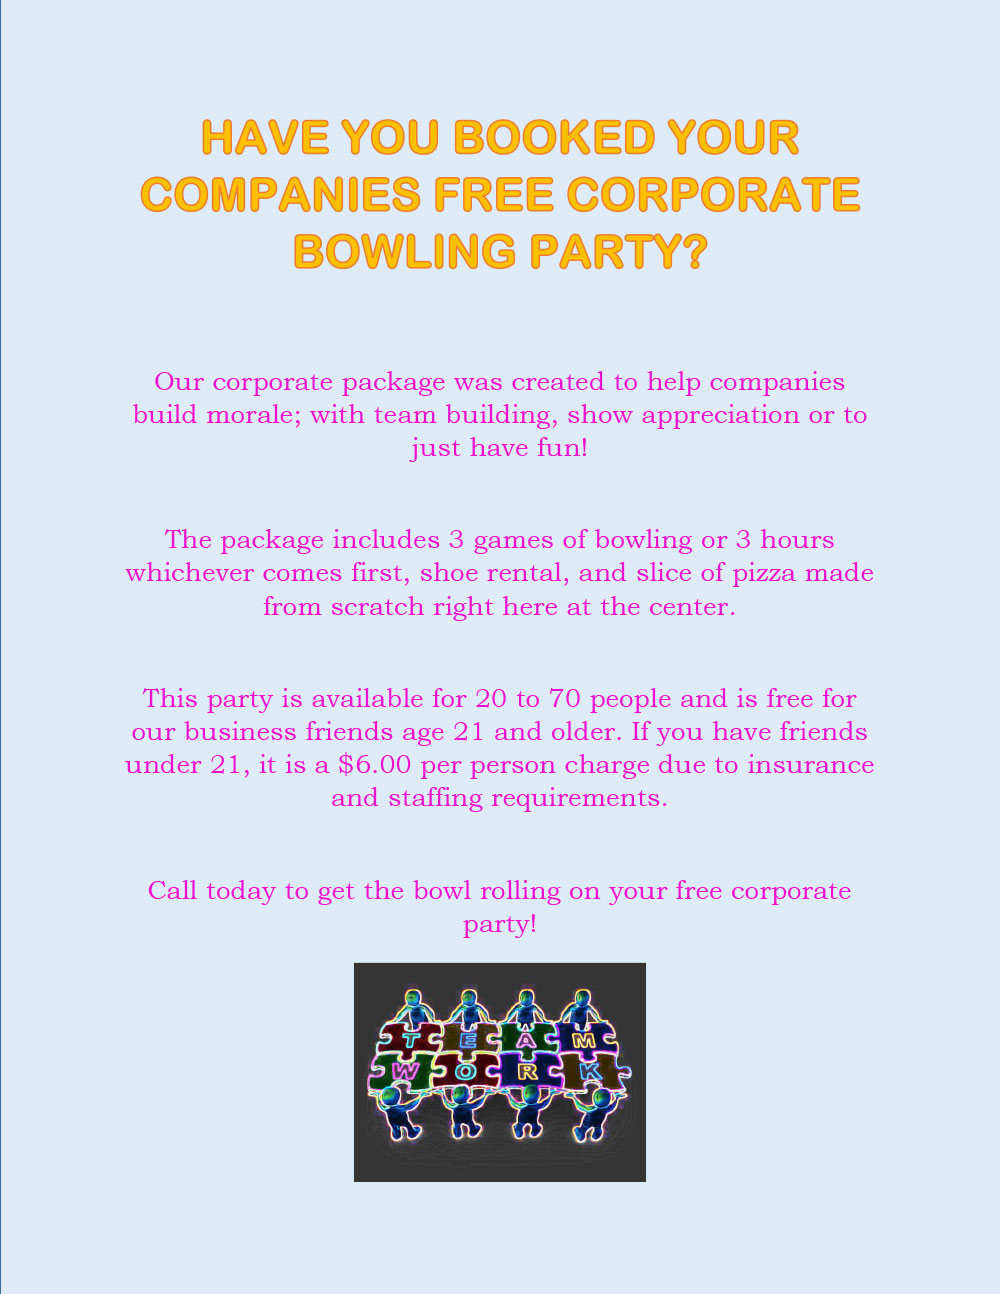 Book Your FREE Business Party!